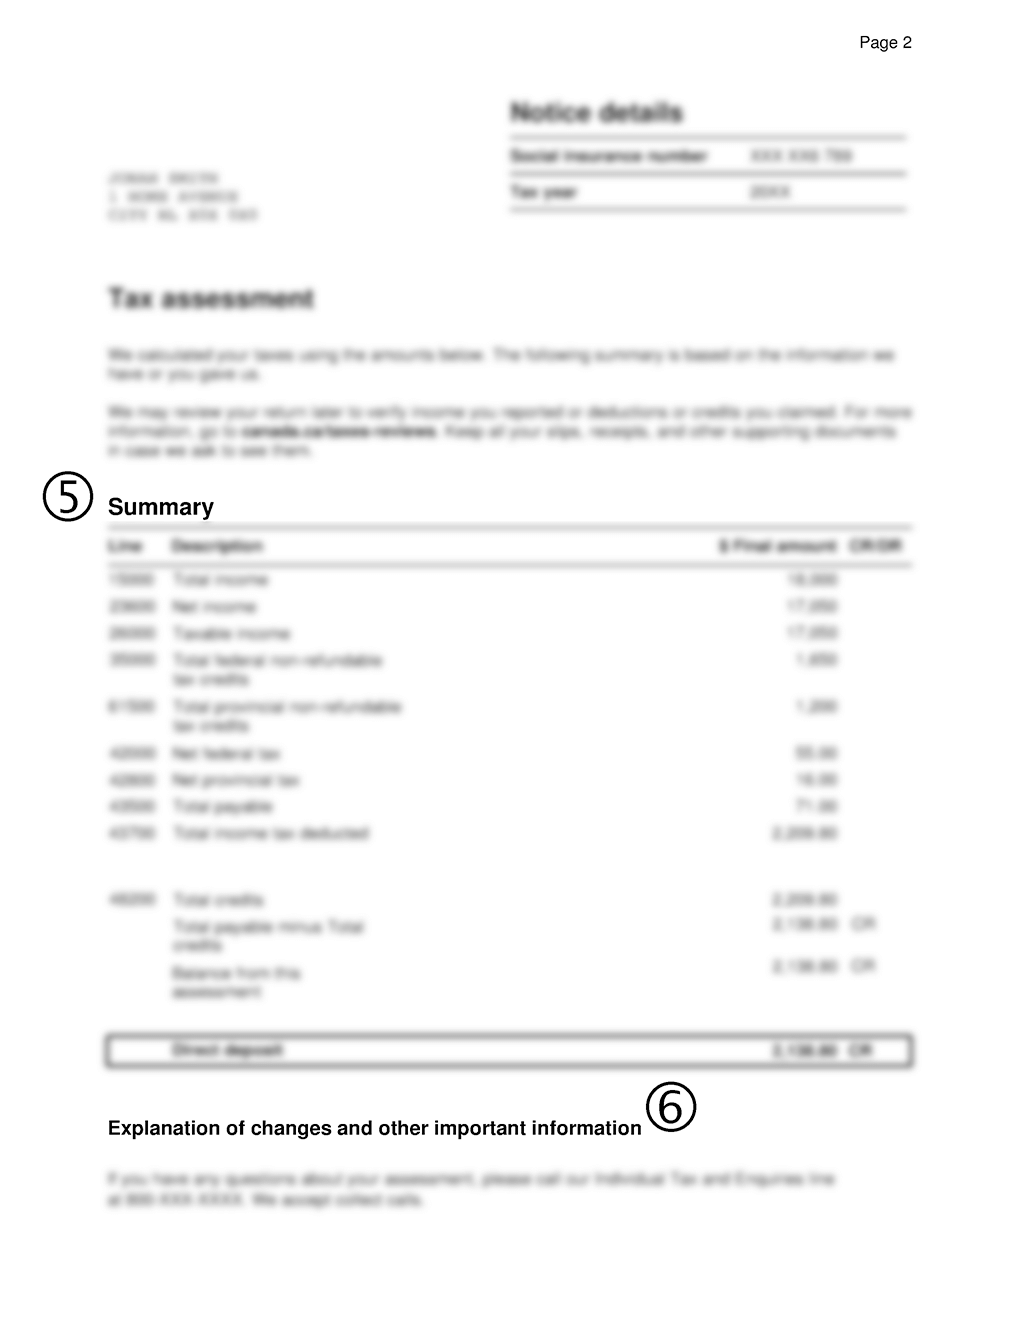 Page two of the notice of assessment, that contains the breakdown of the amounts assessed, including line descriptions, and an explanation of changes and other important information.